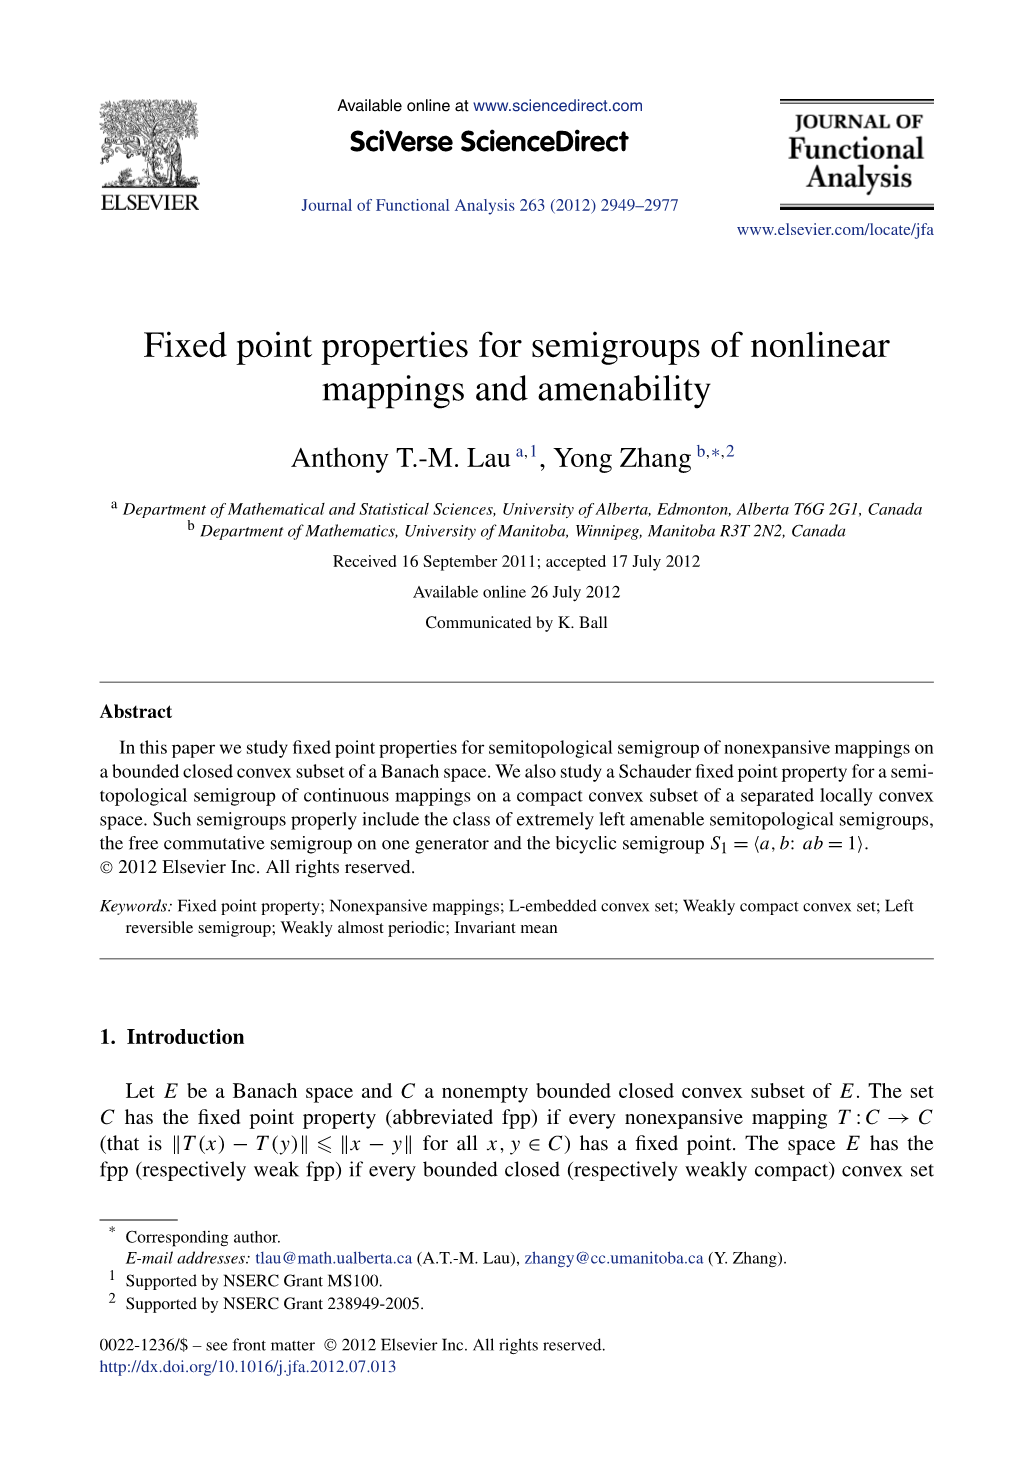 Fixed Point Properties for Semigroups of Nonlinear Mappings and Amenability